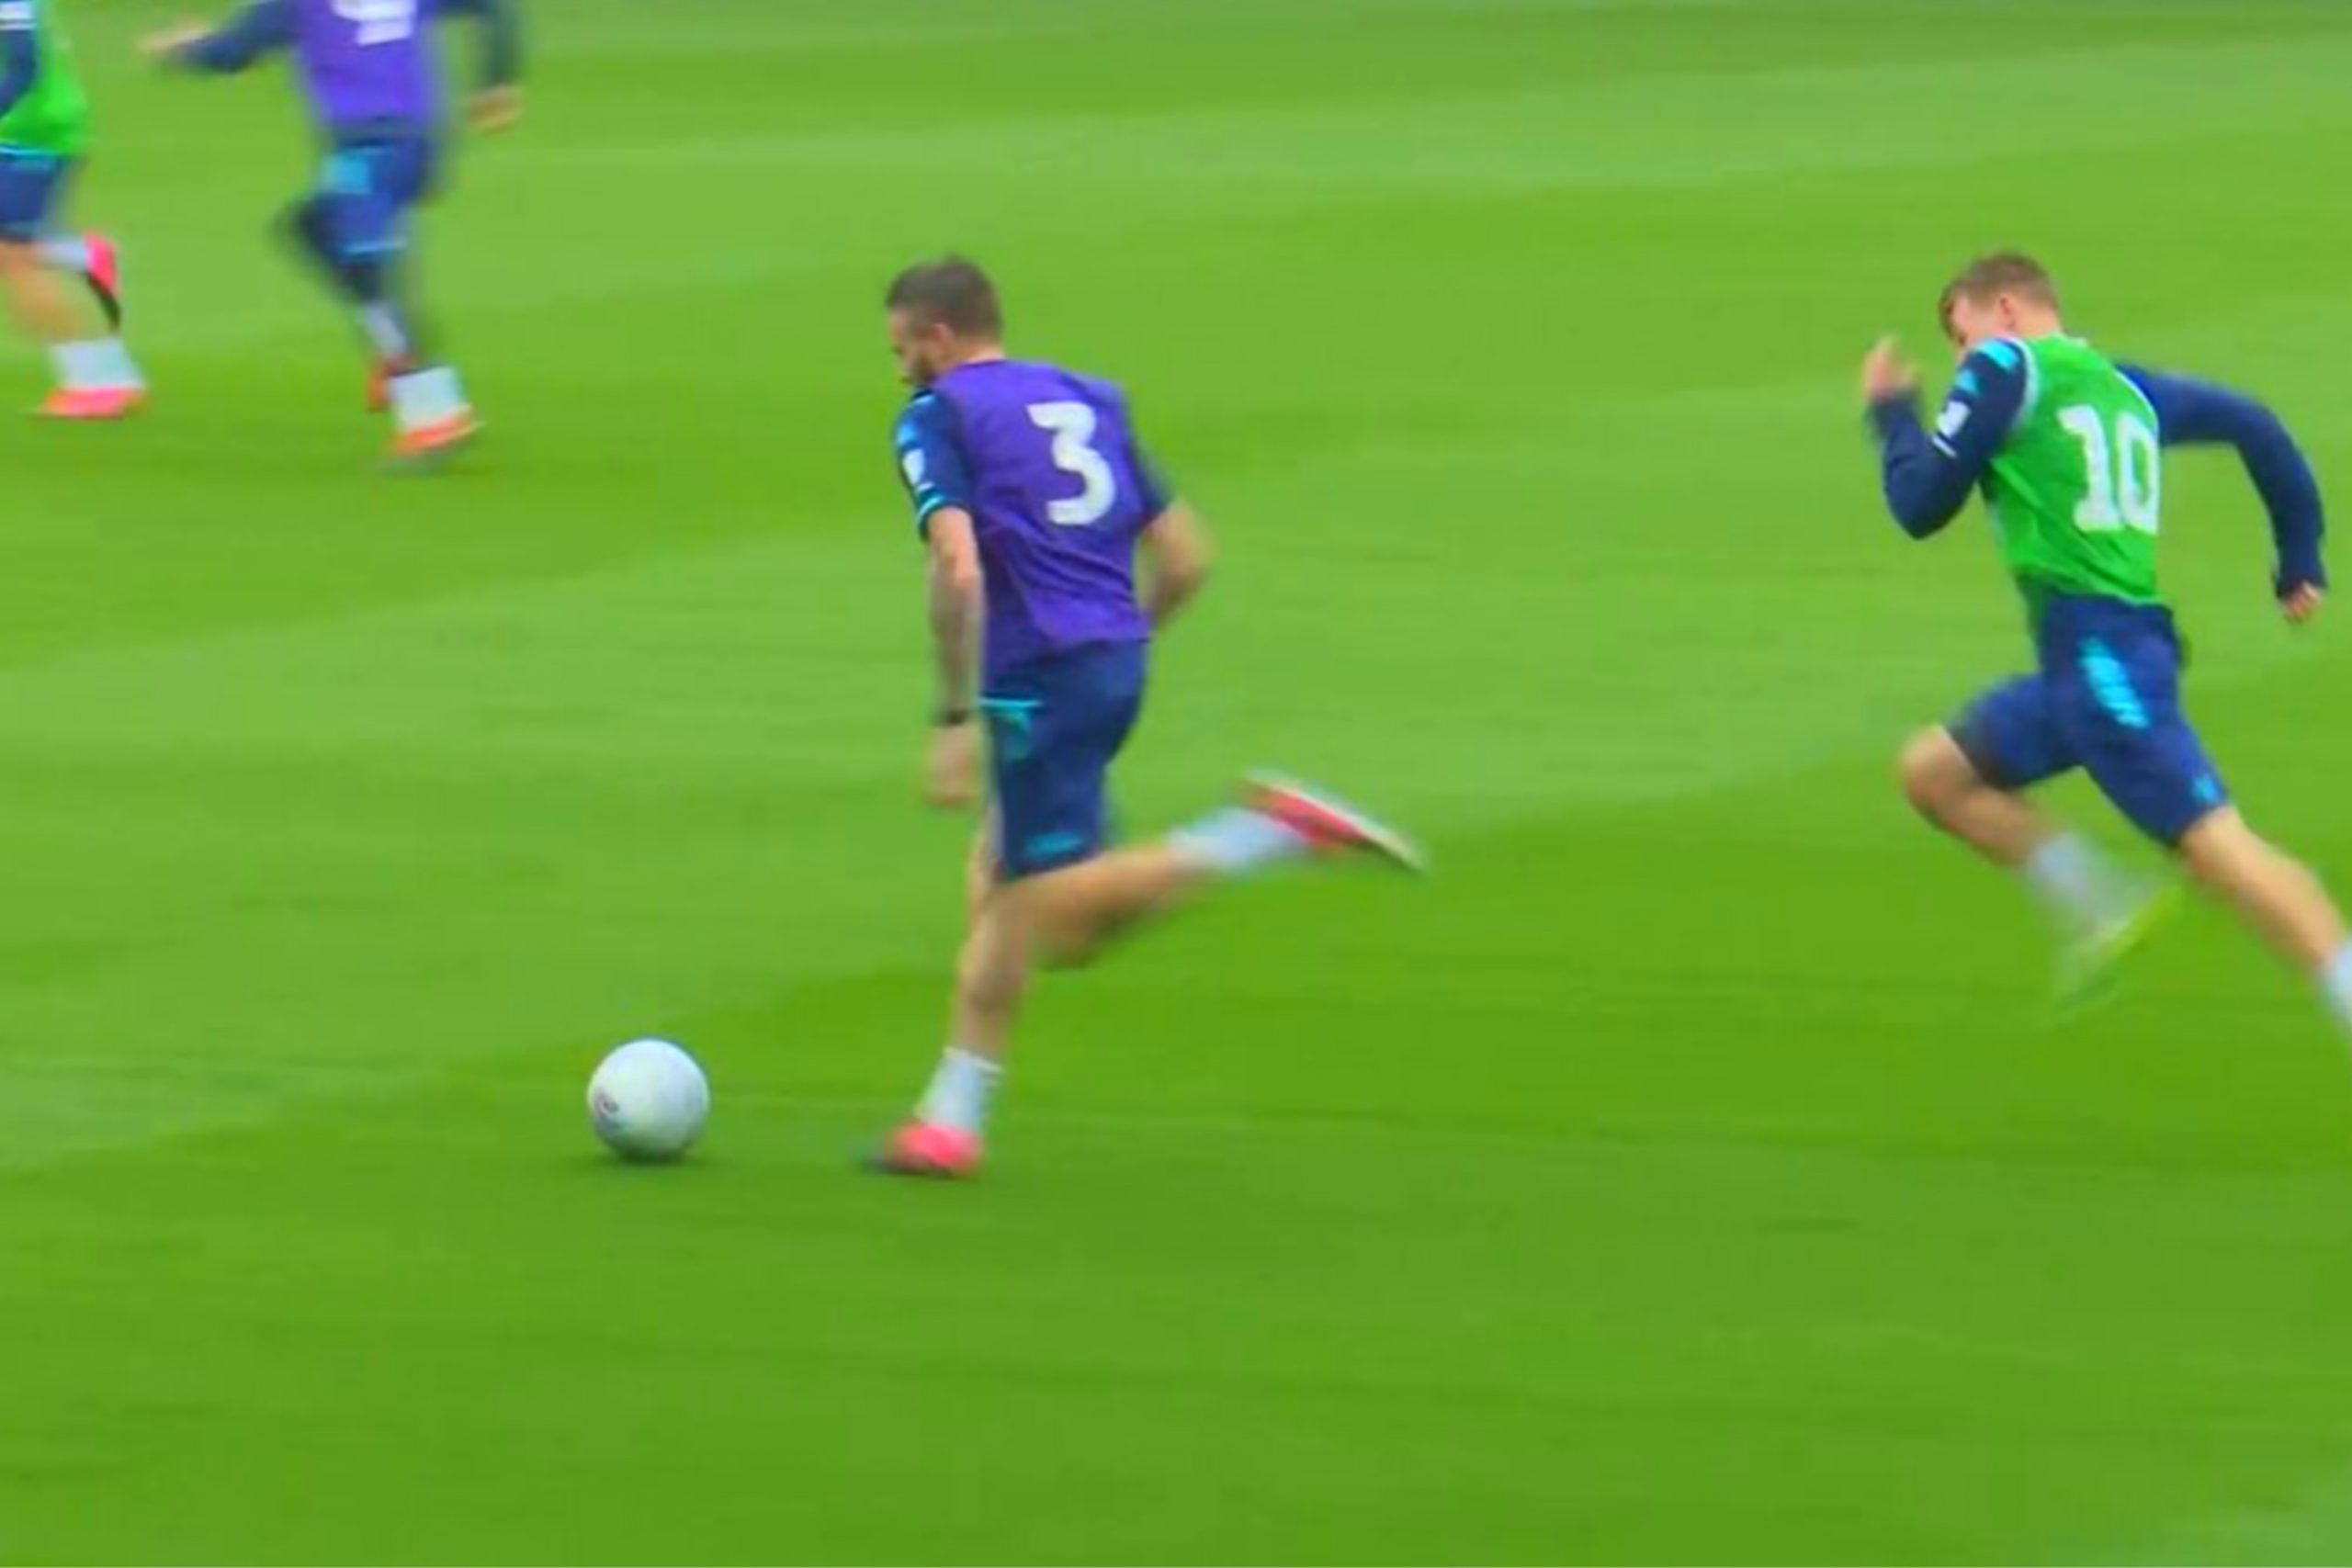 (Video) Stuart Dallas shows off electric pace in training pre Leeds United v Cardiff City clash